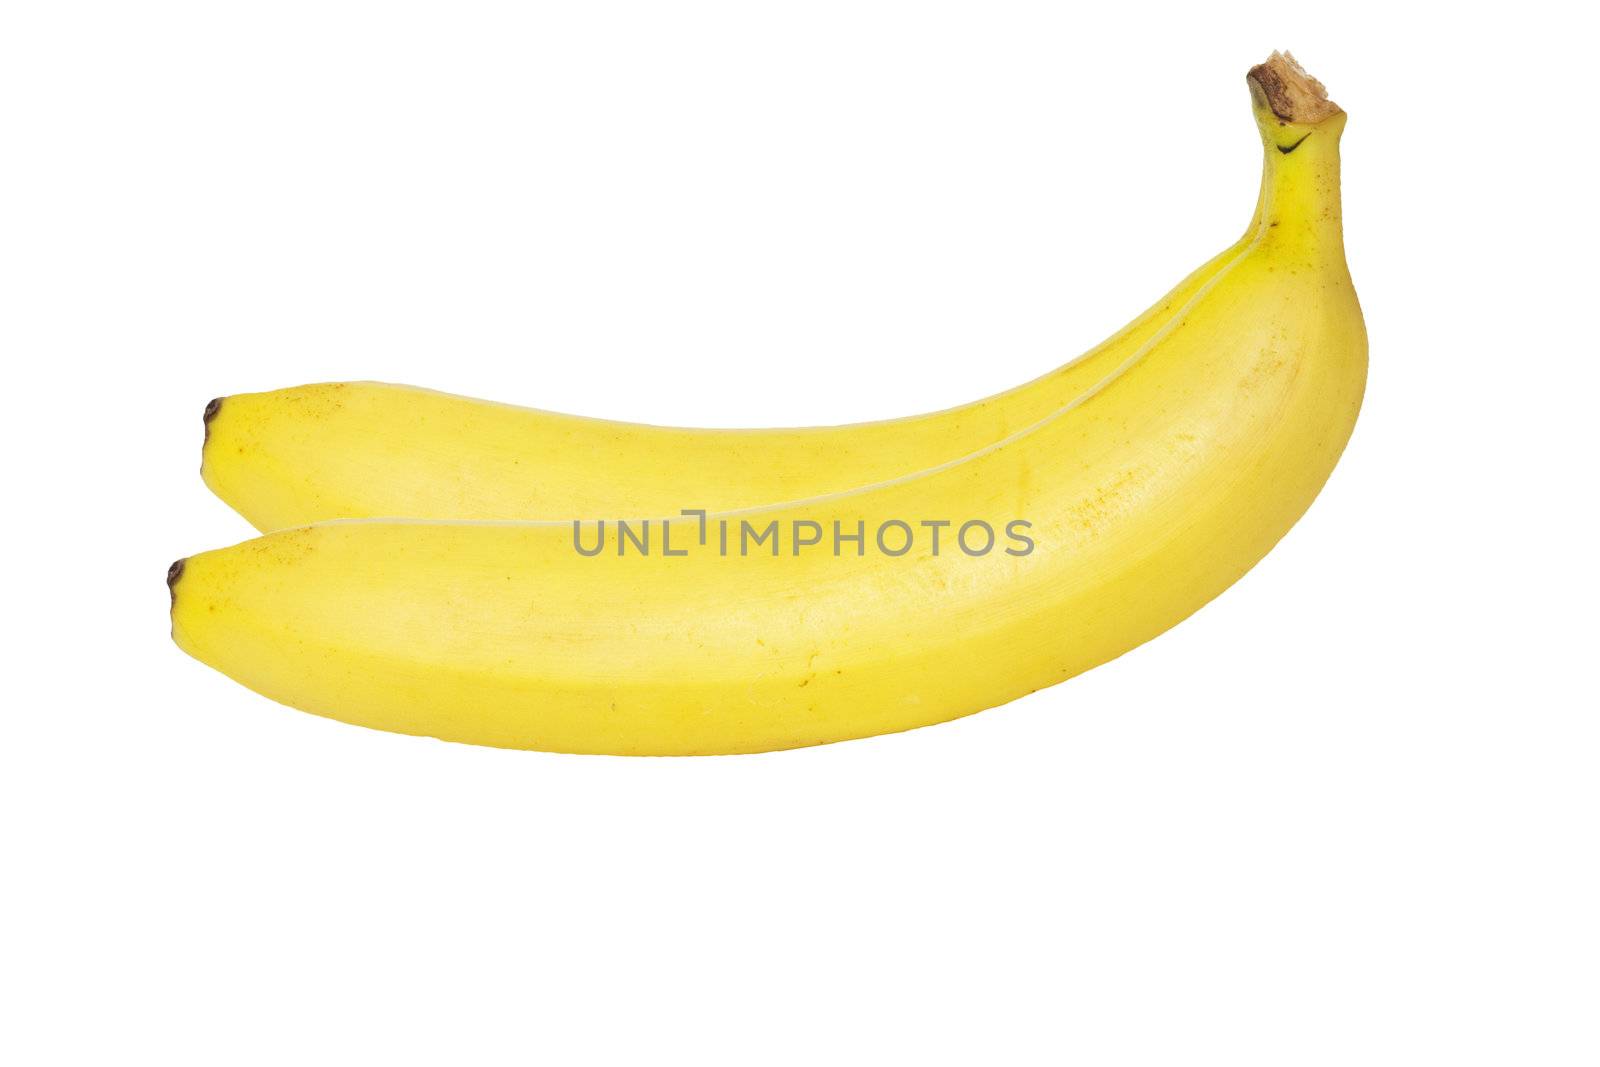 two mature bananas insulated on white background by schankz